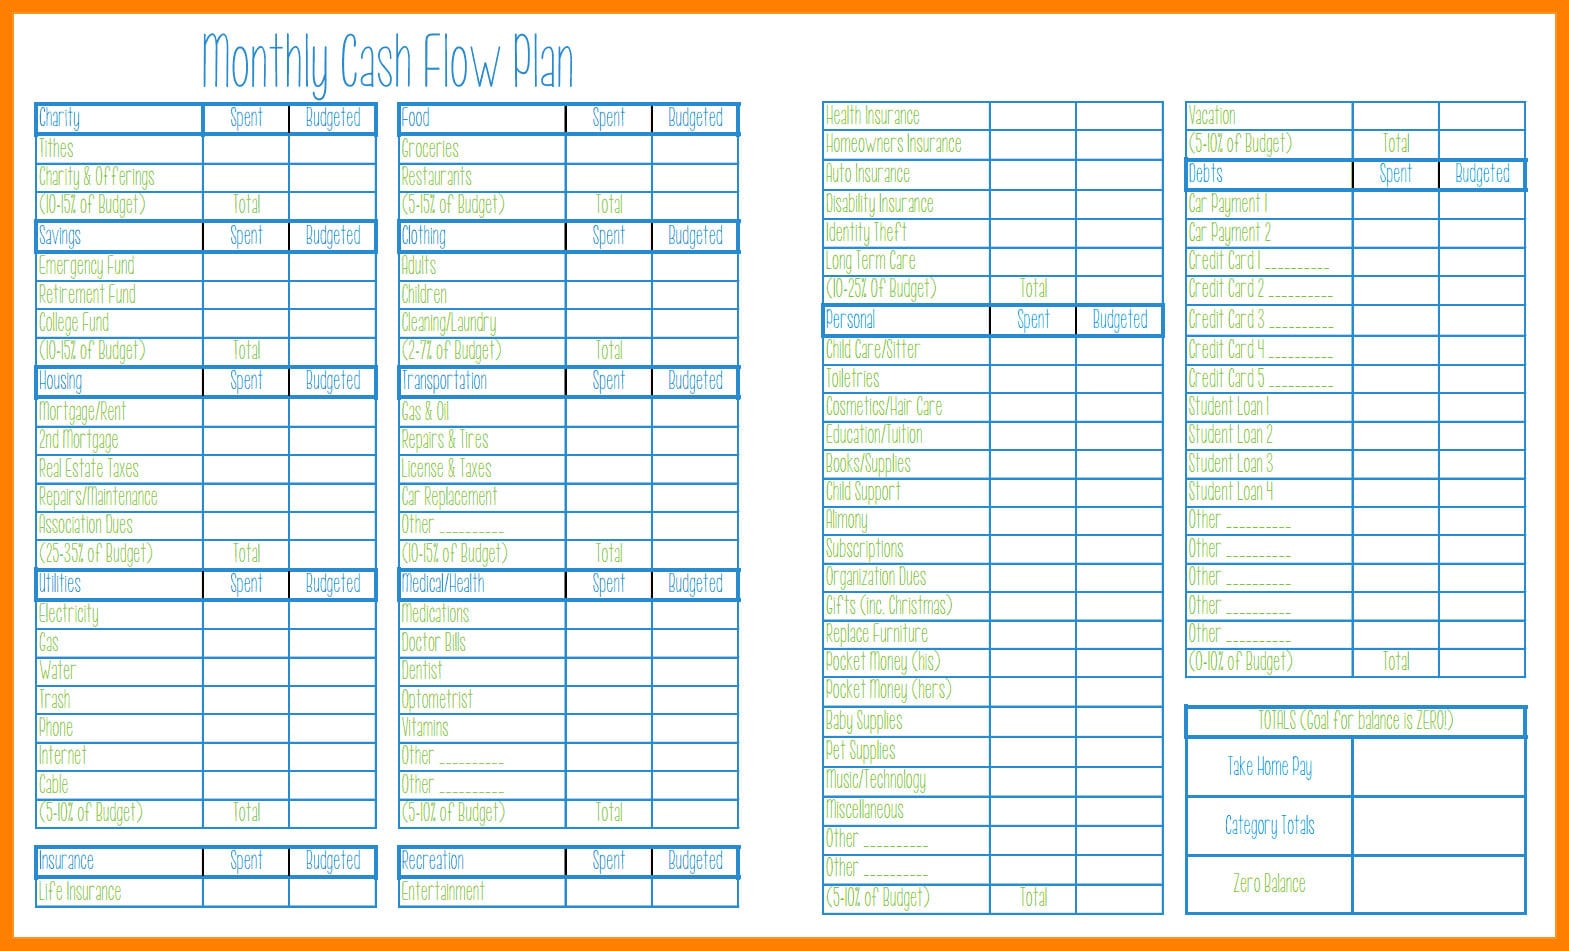 Dave Ramsey Get Form Dos Joinery Forms Allocated Spending Also Spending Plan Worksheet